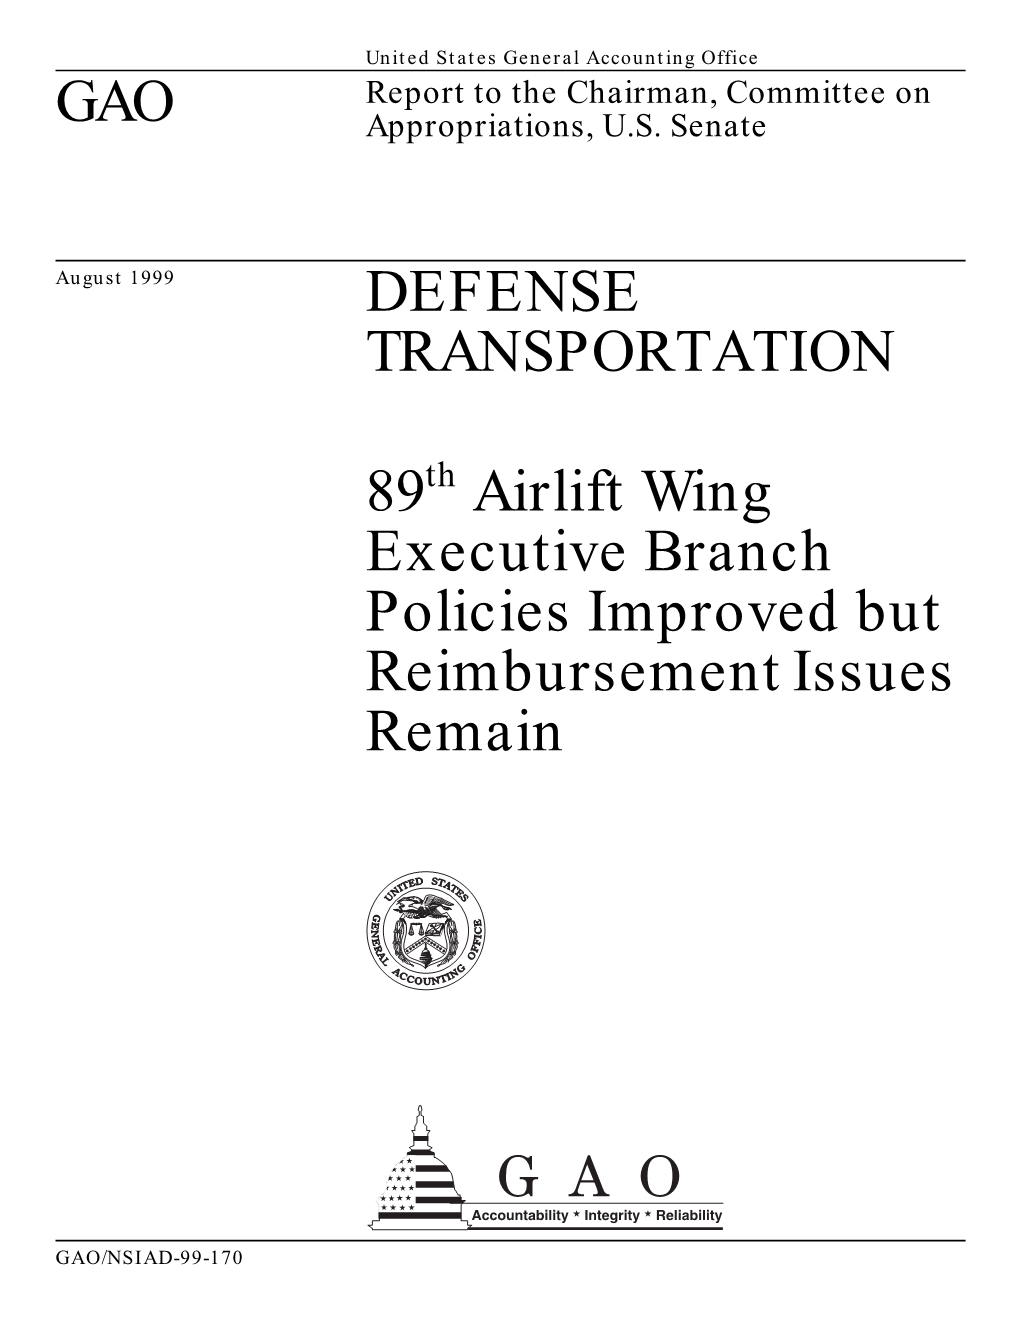 89Th Airlift Wing Executive Branch Policies Improved but Reimbursement Issues Remain